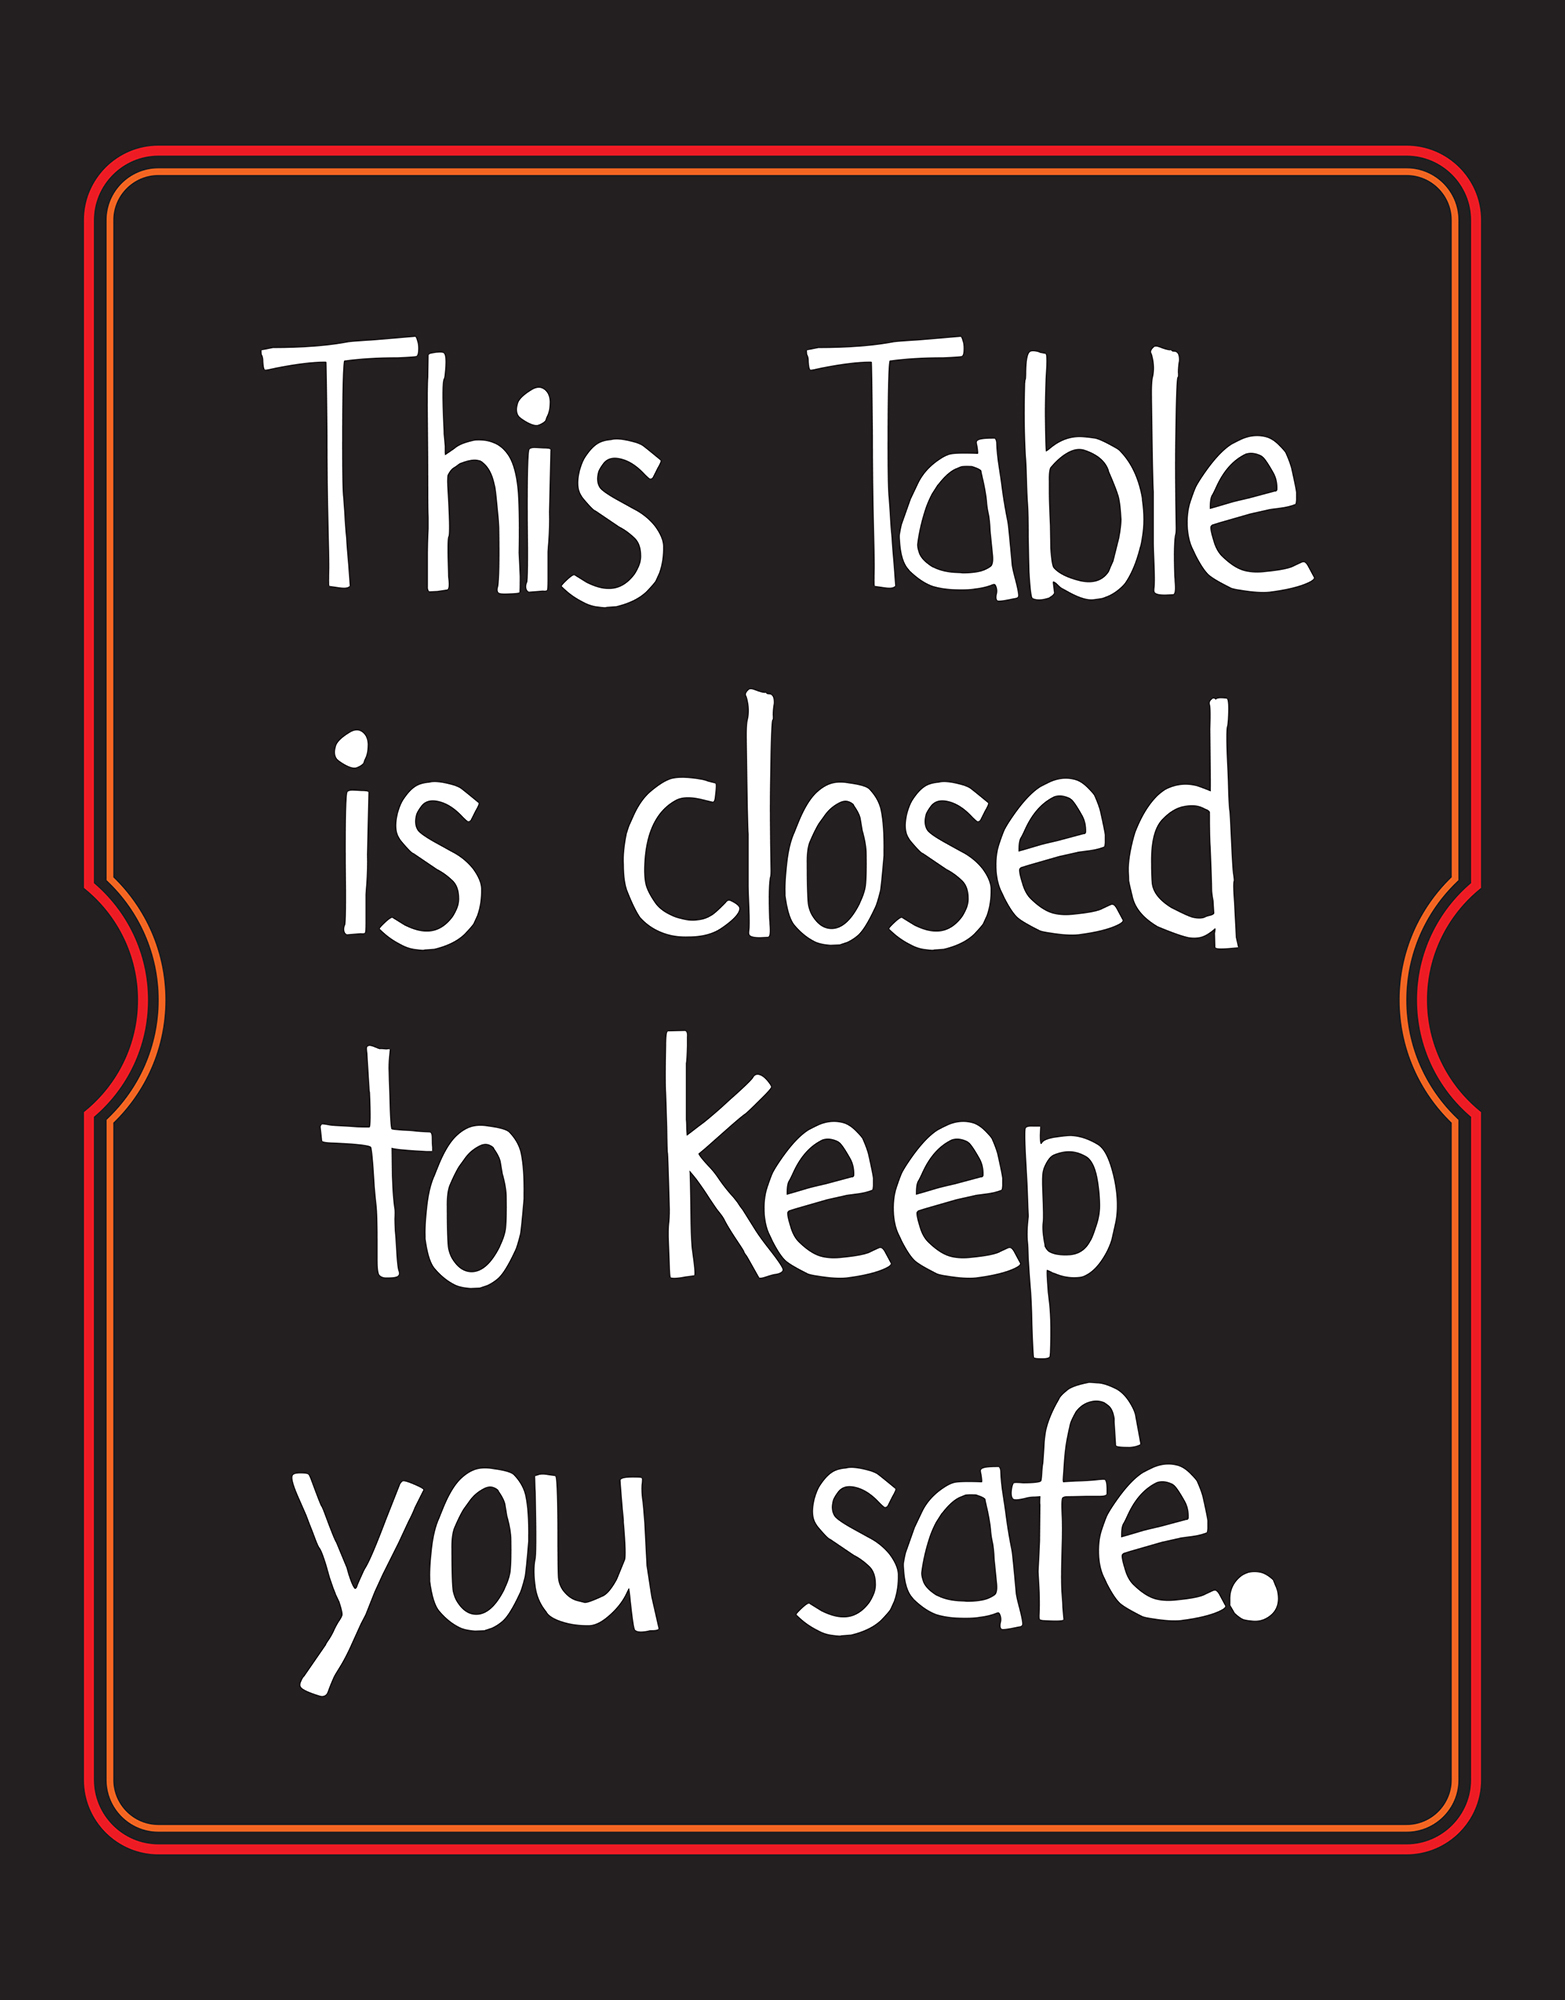 Table Closed